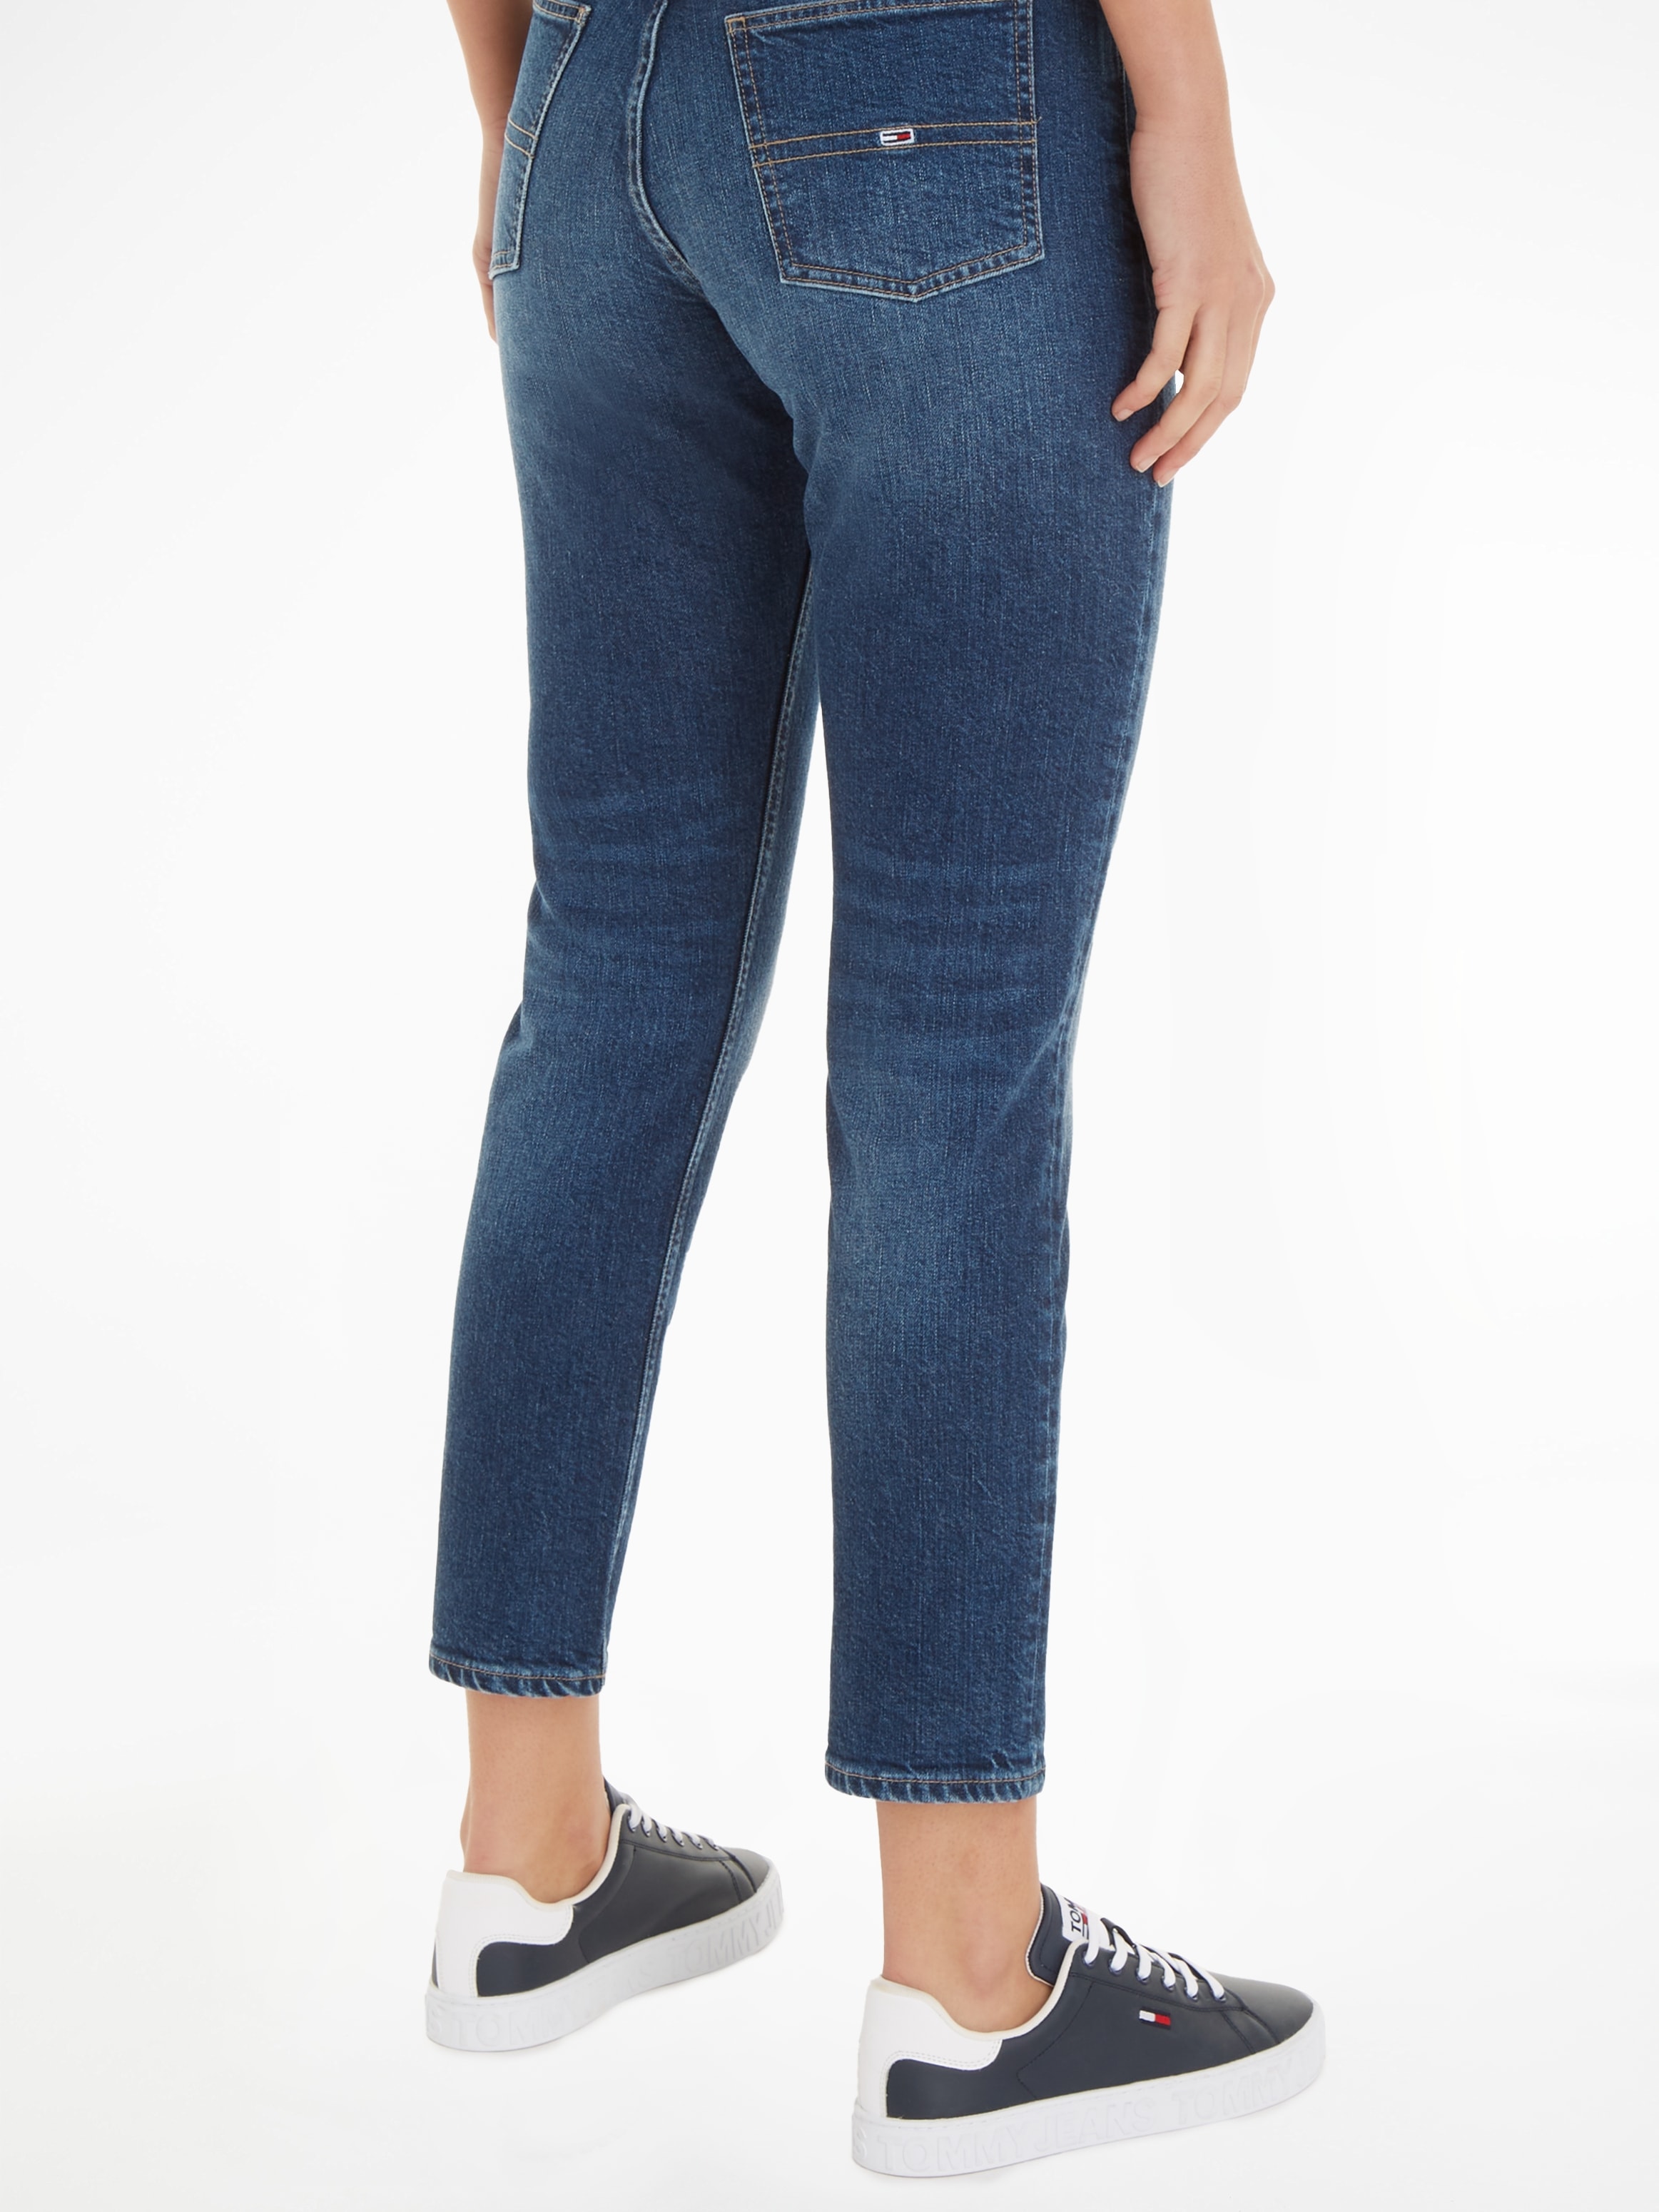 mit Slim-fit-Jeans SL CG4139«, ANK OTTOversand »IZZIE Logo-Badge Tommy Jeans HR Tommy bei